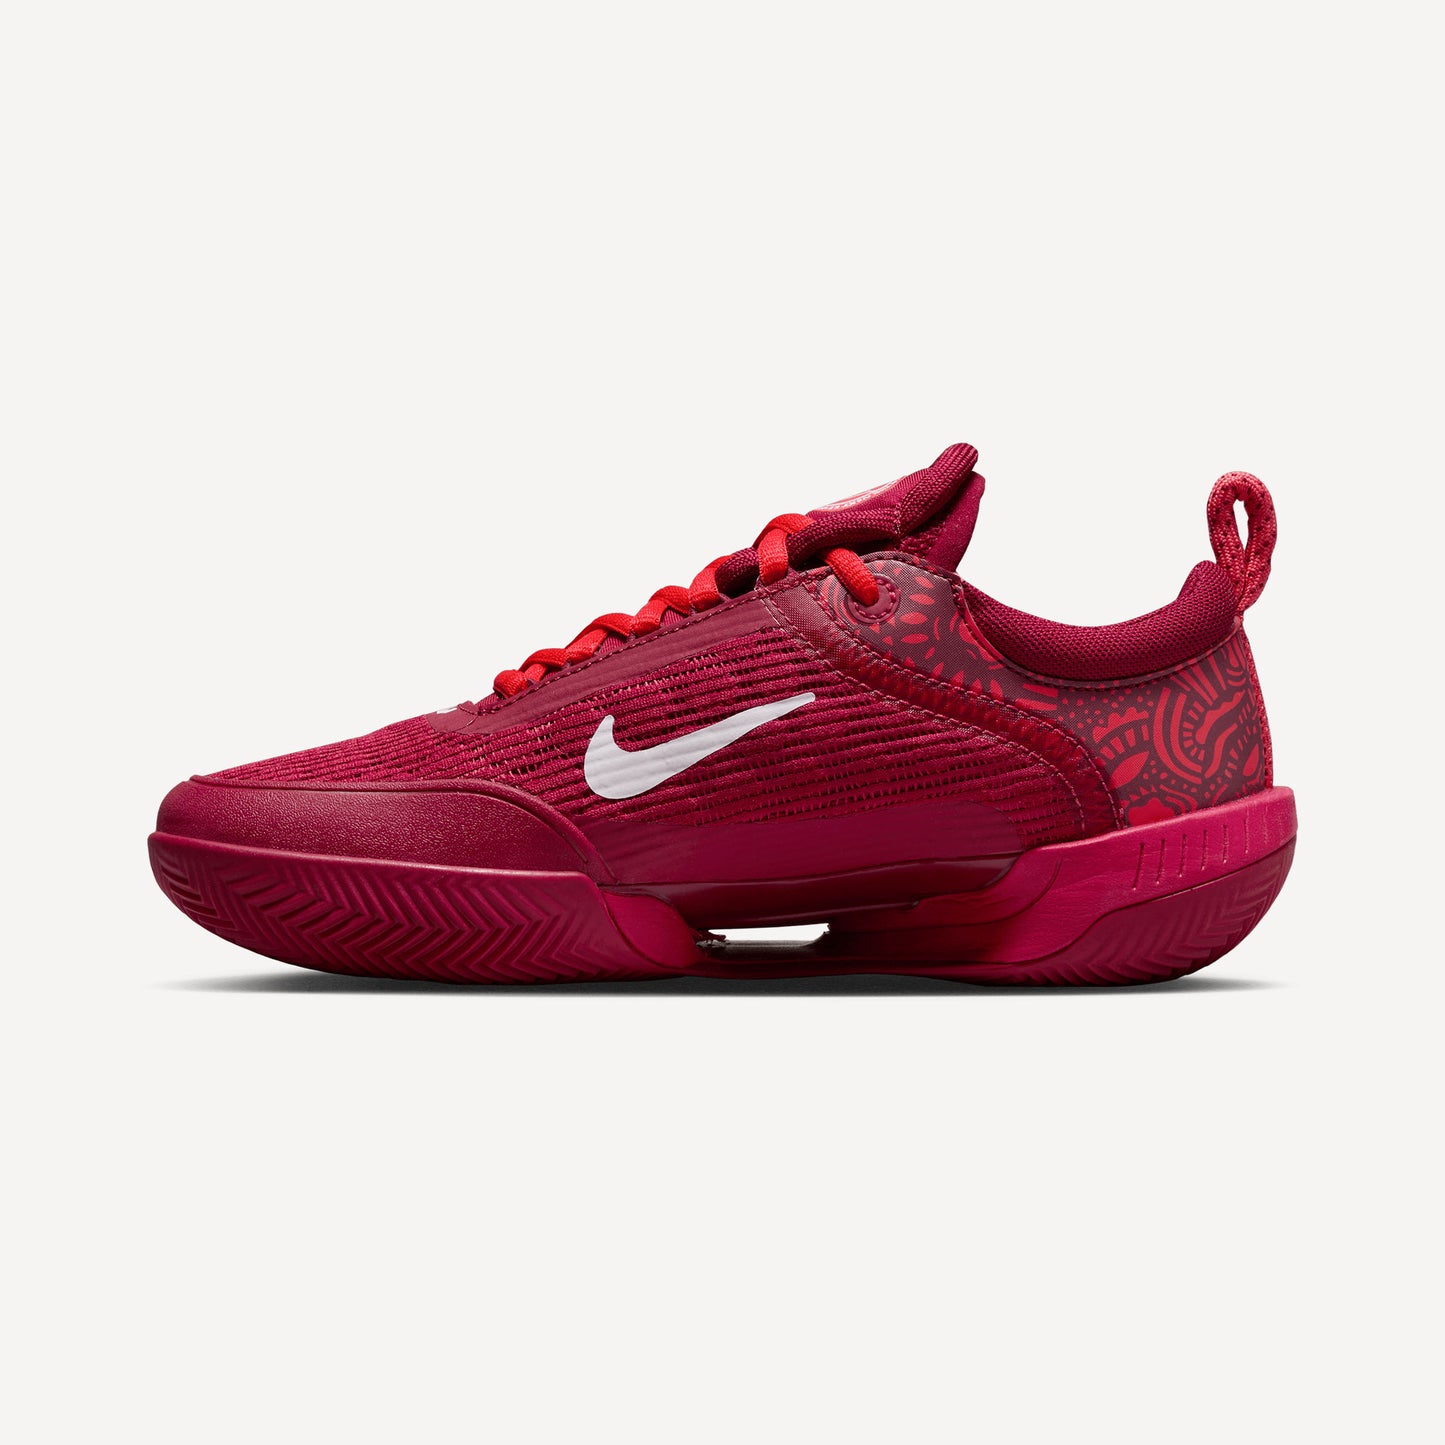 NikeCourt Zoom Court NXT Women's Clay Court Tennis Shoes Red (3)